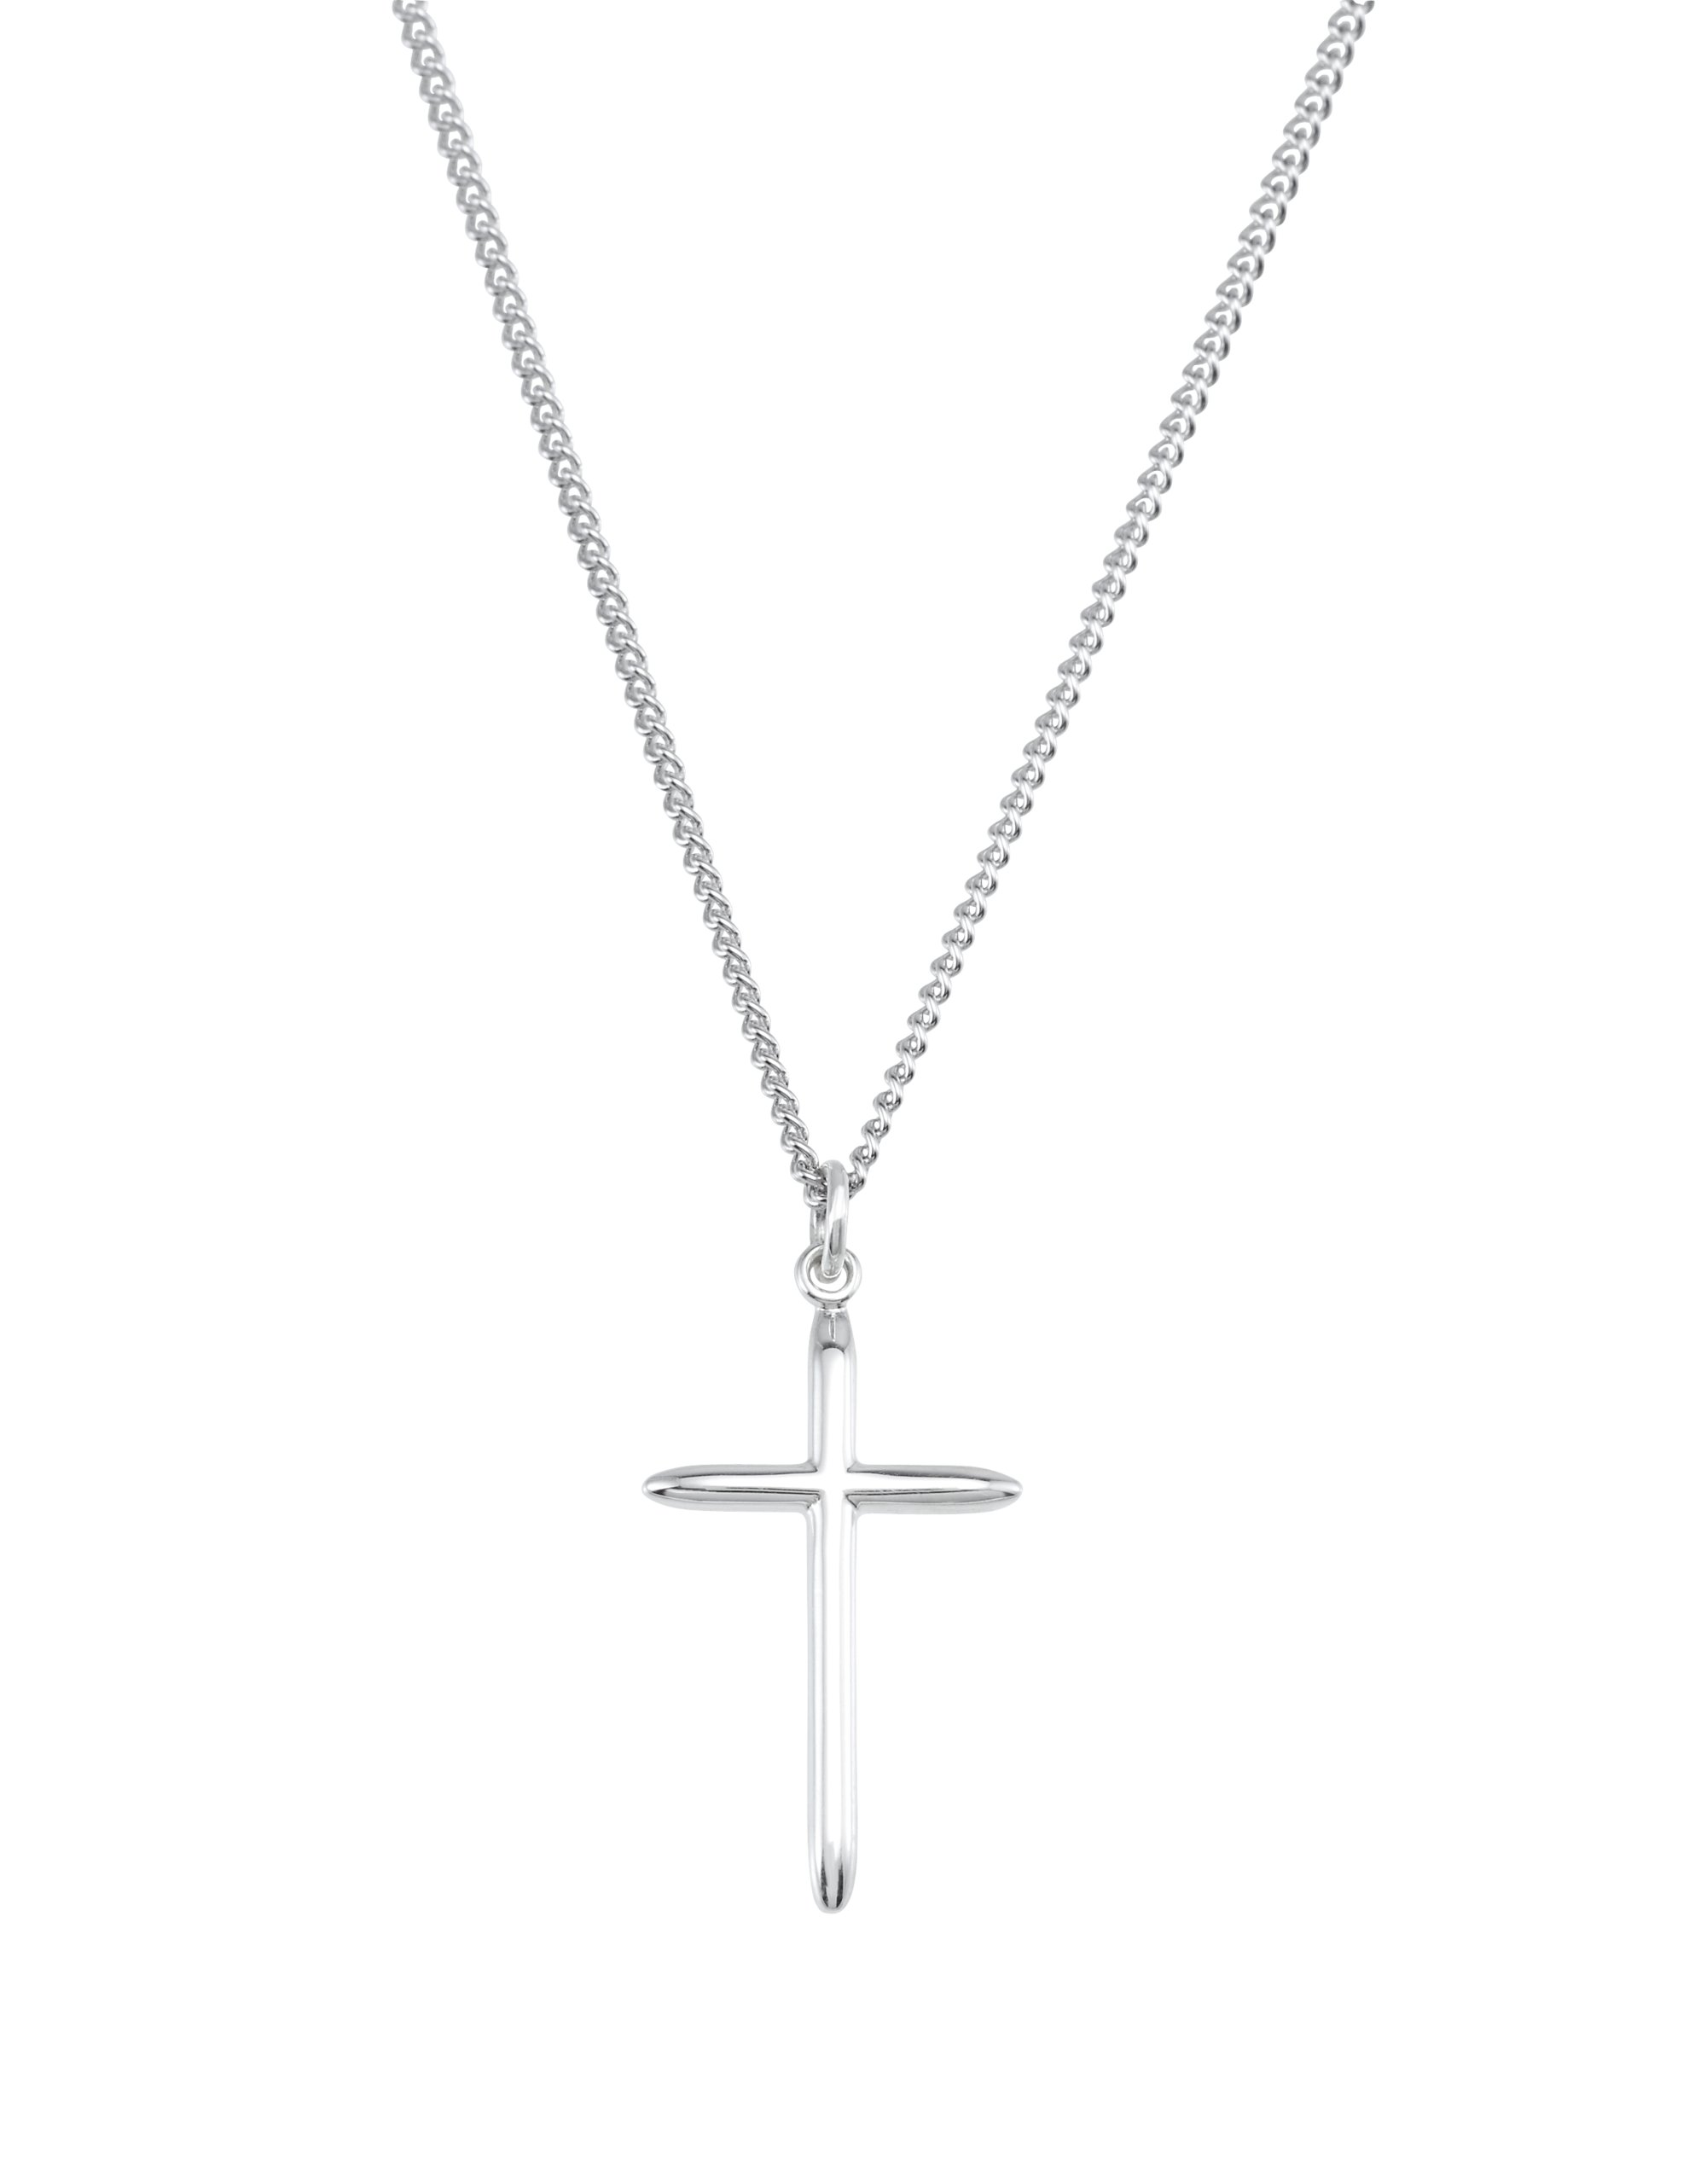 Sterling Silver Cross Pendant 25 x 15mm with 18 inch Chain Ref 735886